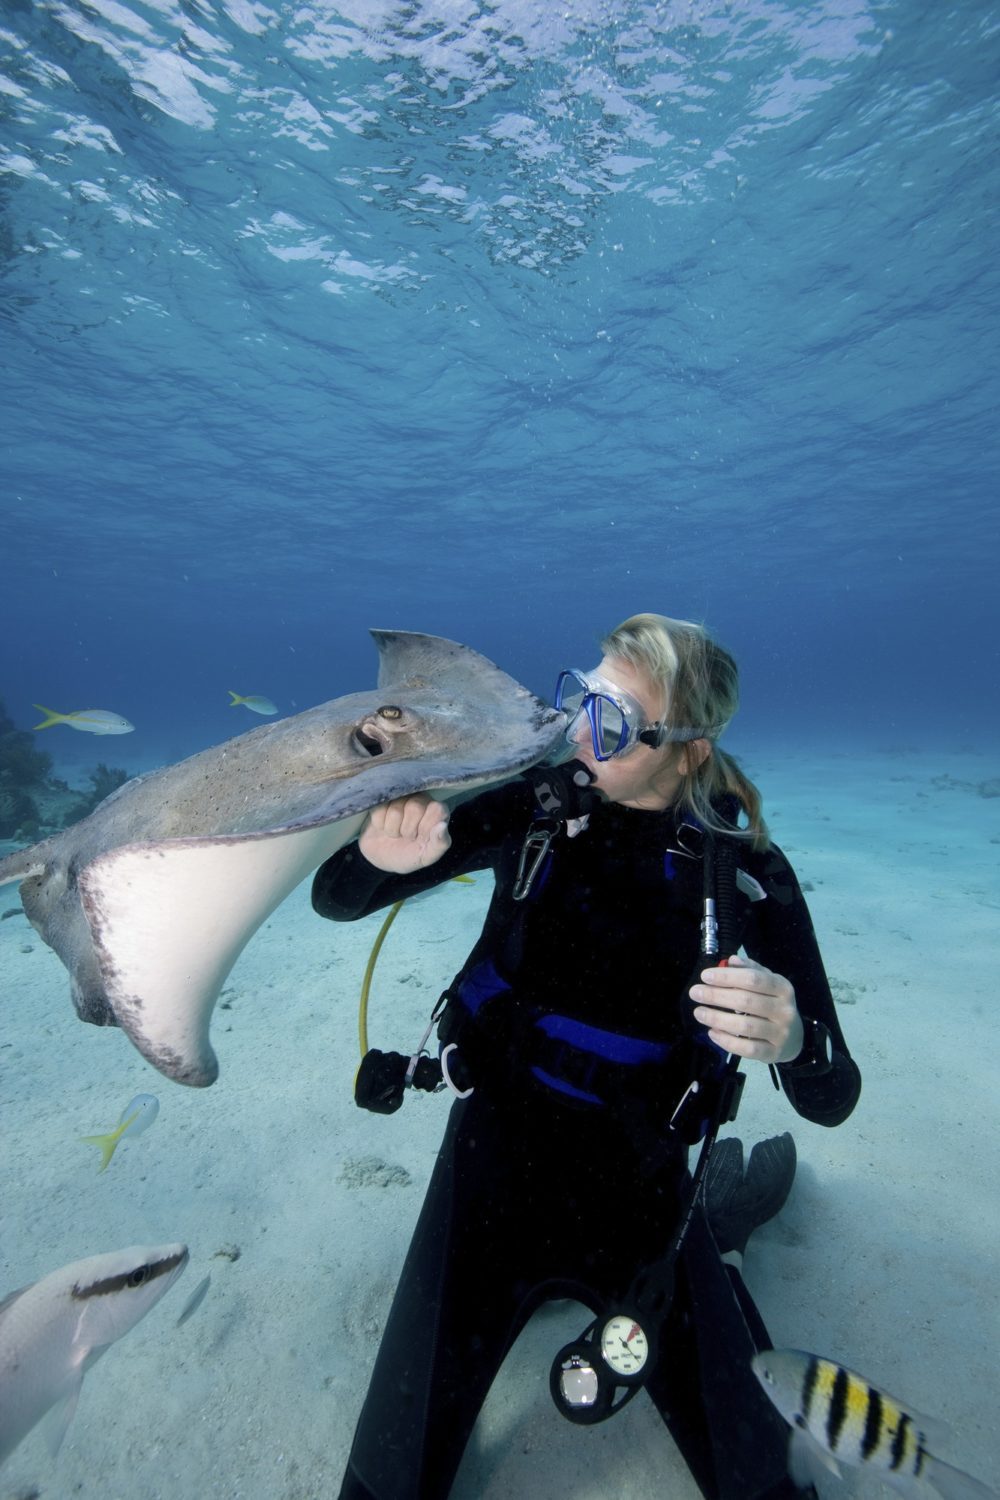 Scuba diver interacts with Southern Stingrays (Dasyatis americana)